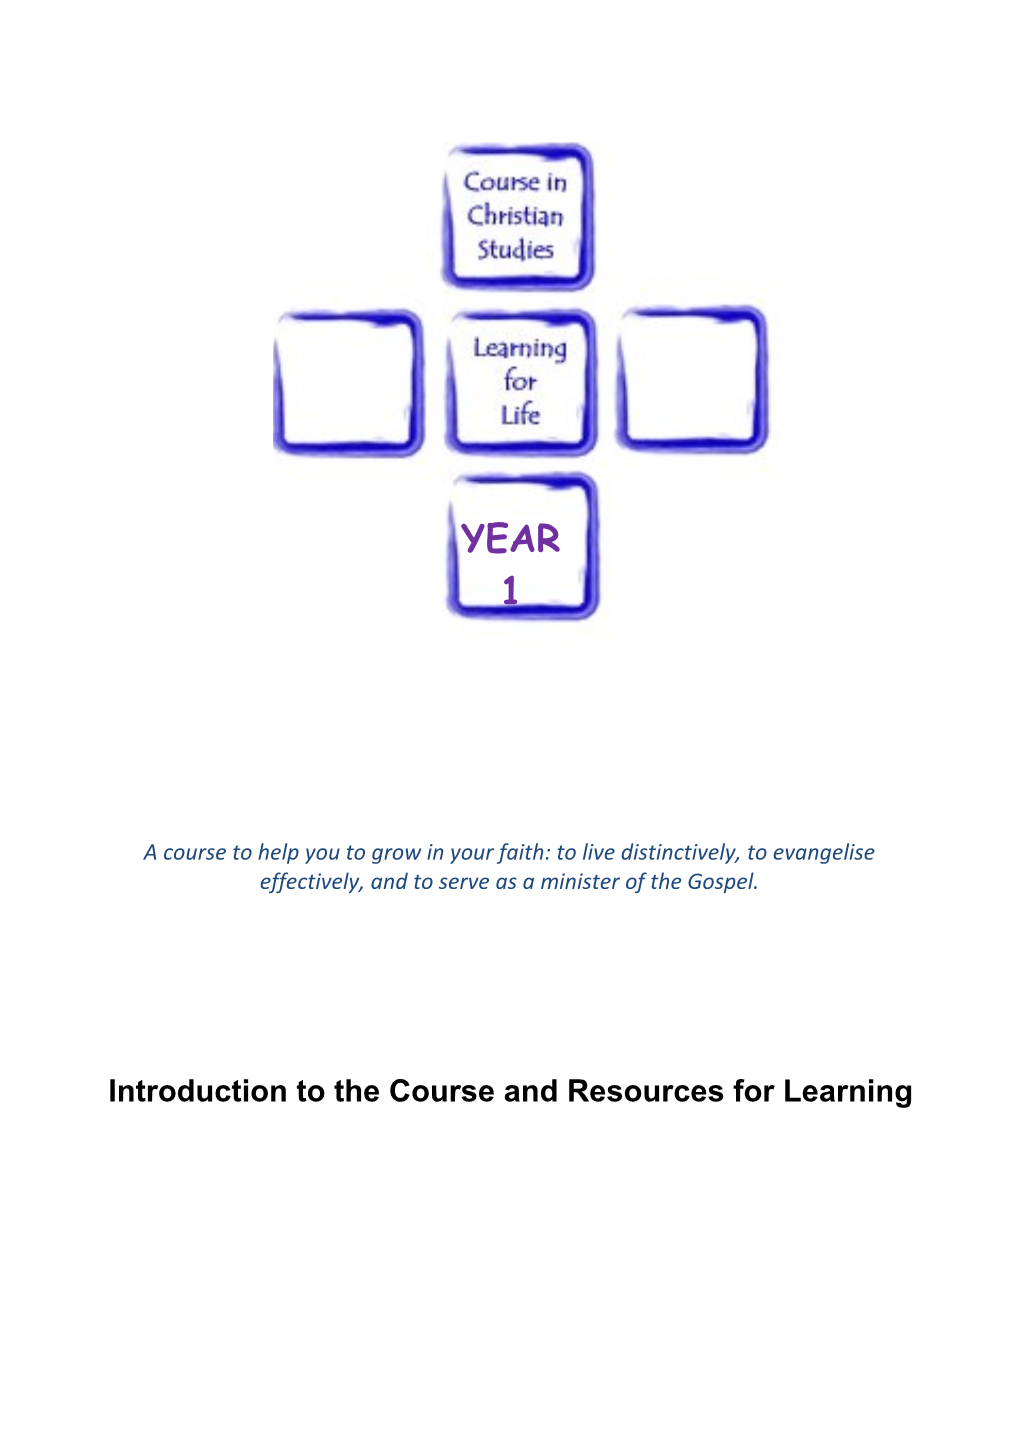 Introduction to the Course and Resources for Learning